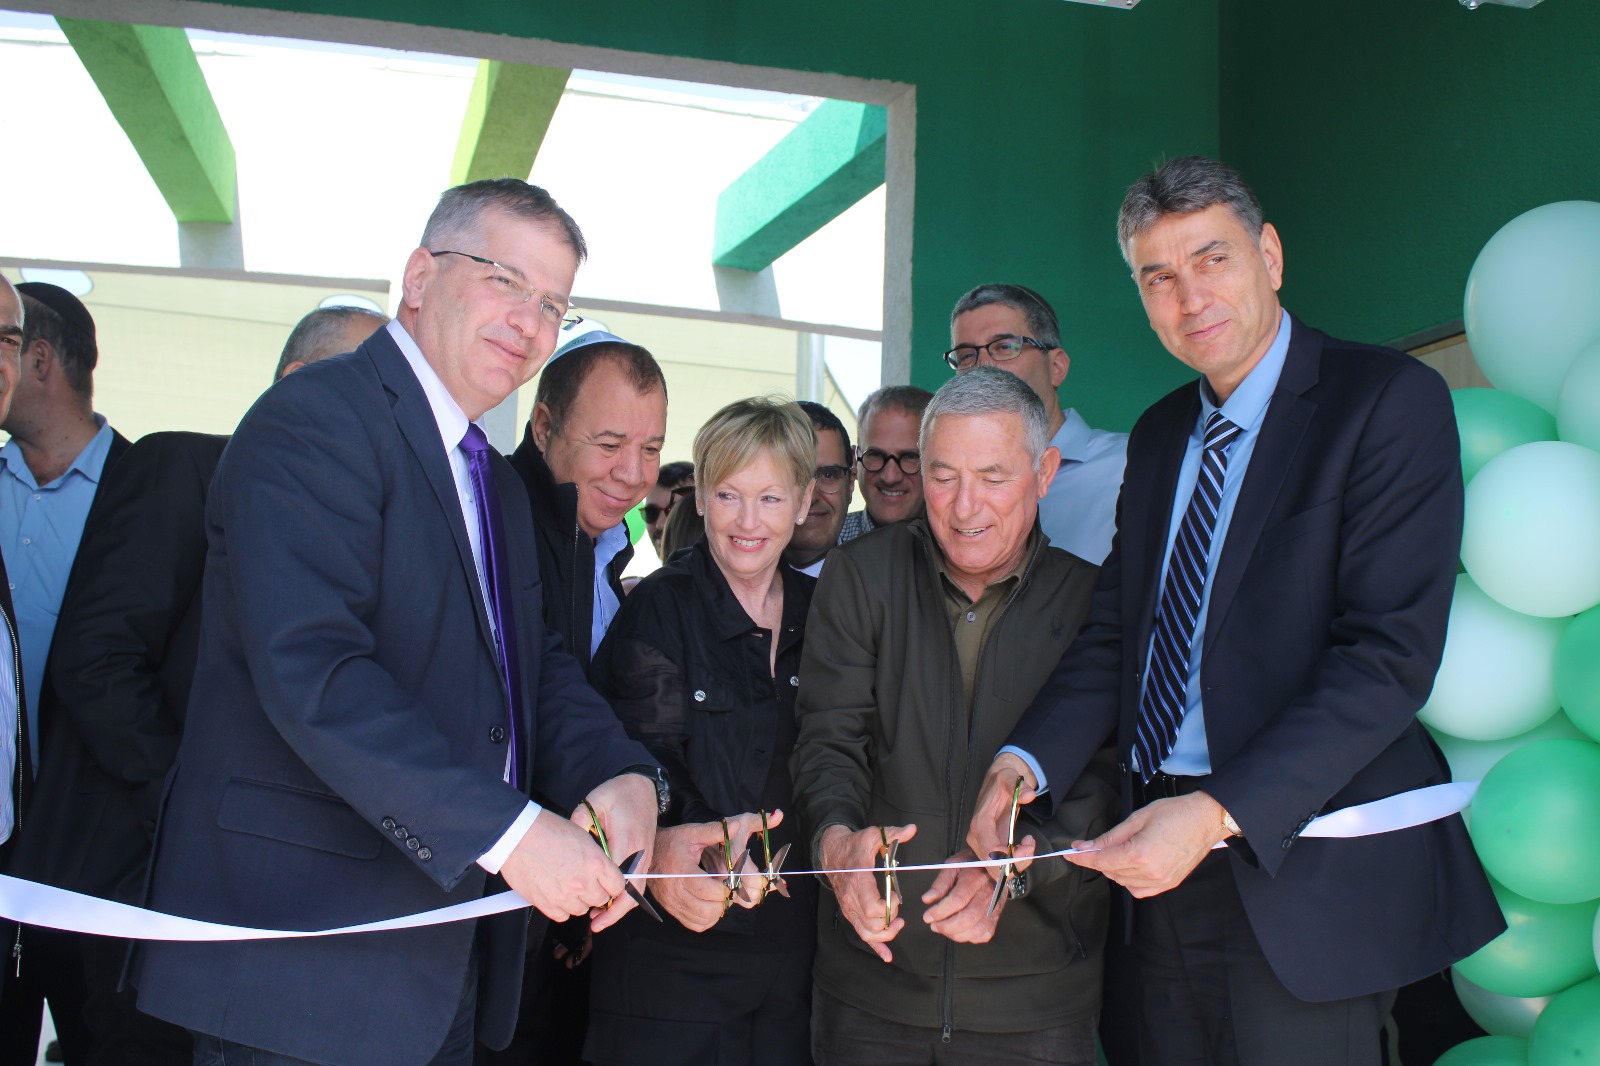 Blossoming the Negev: The Opening of ADI’s New Kindergarten Complex